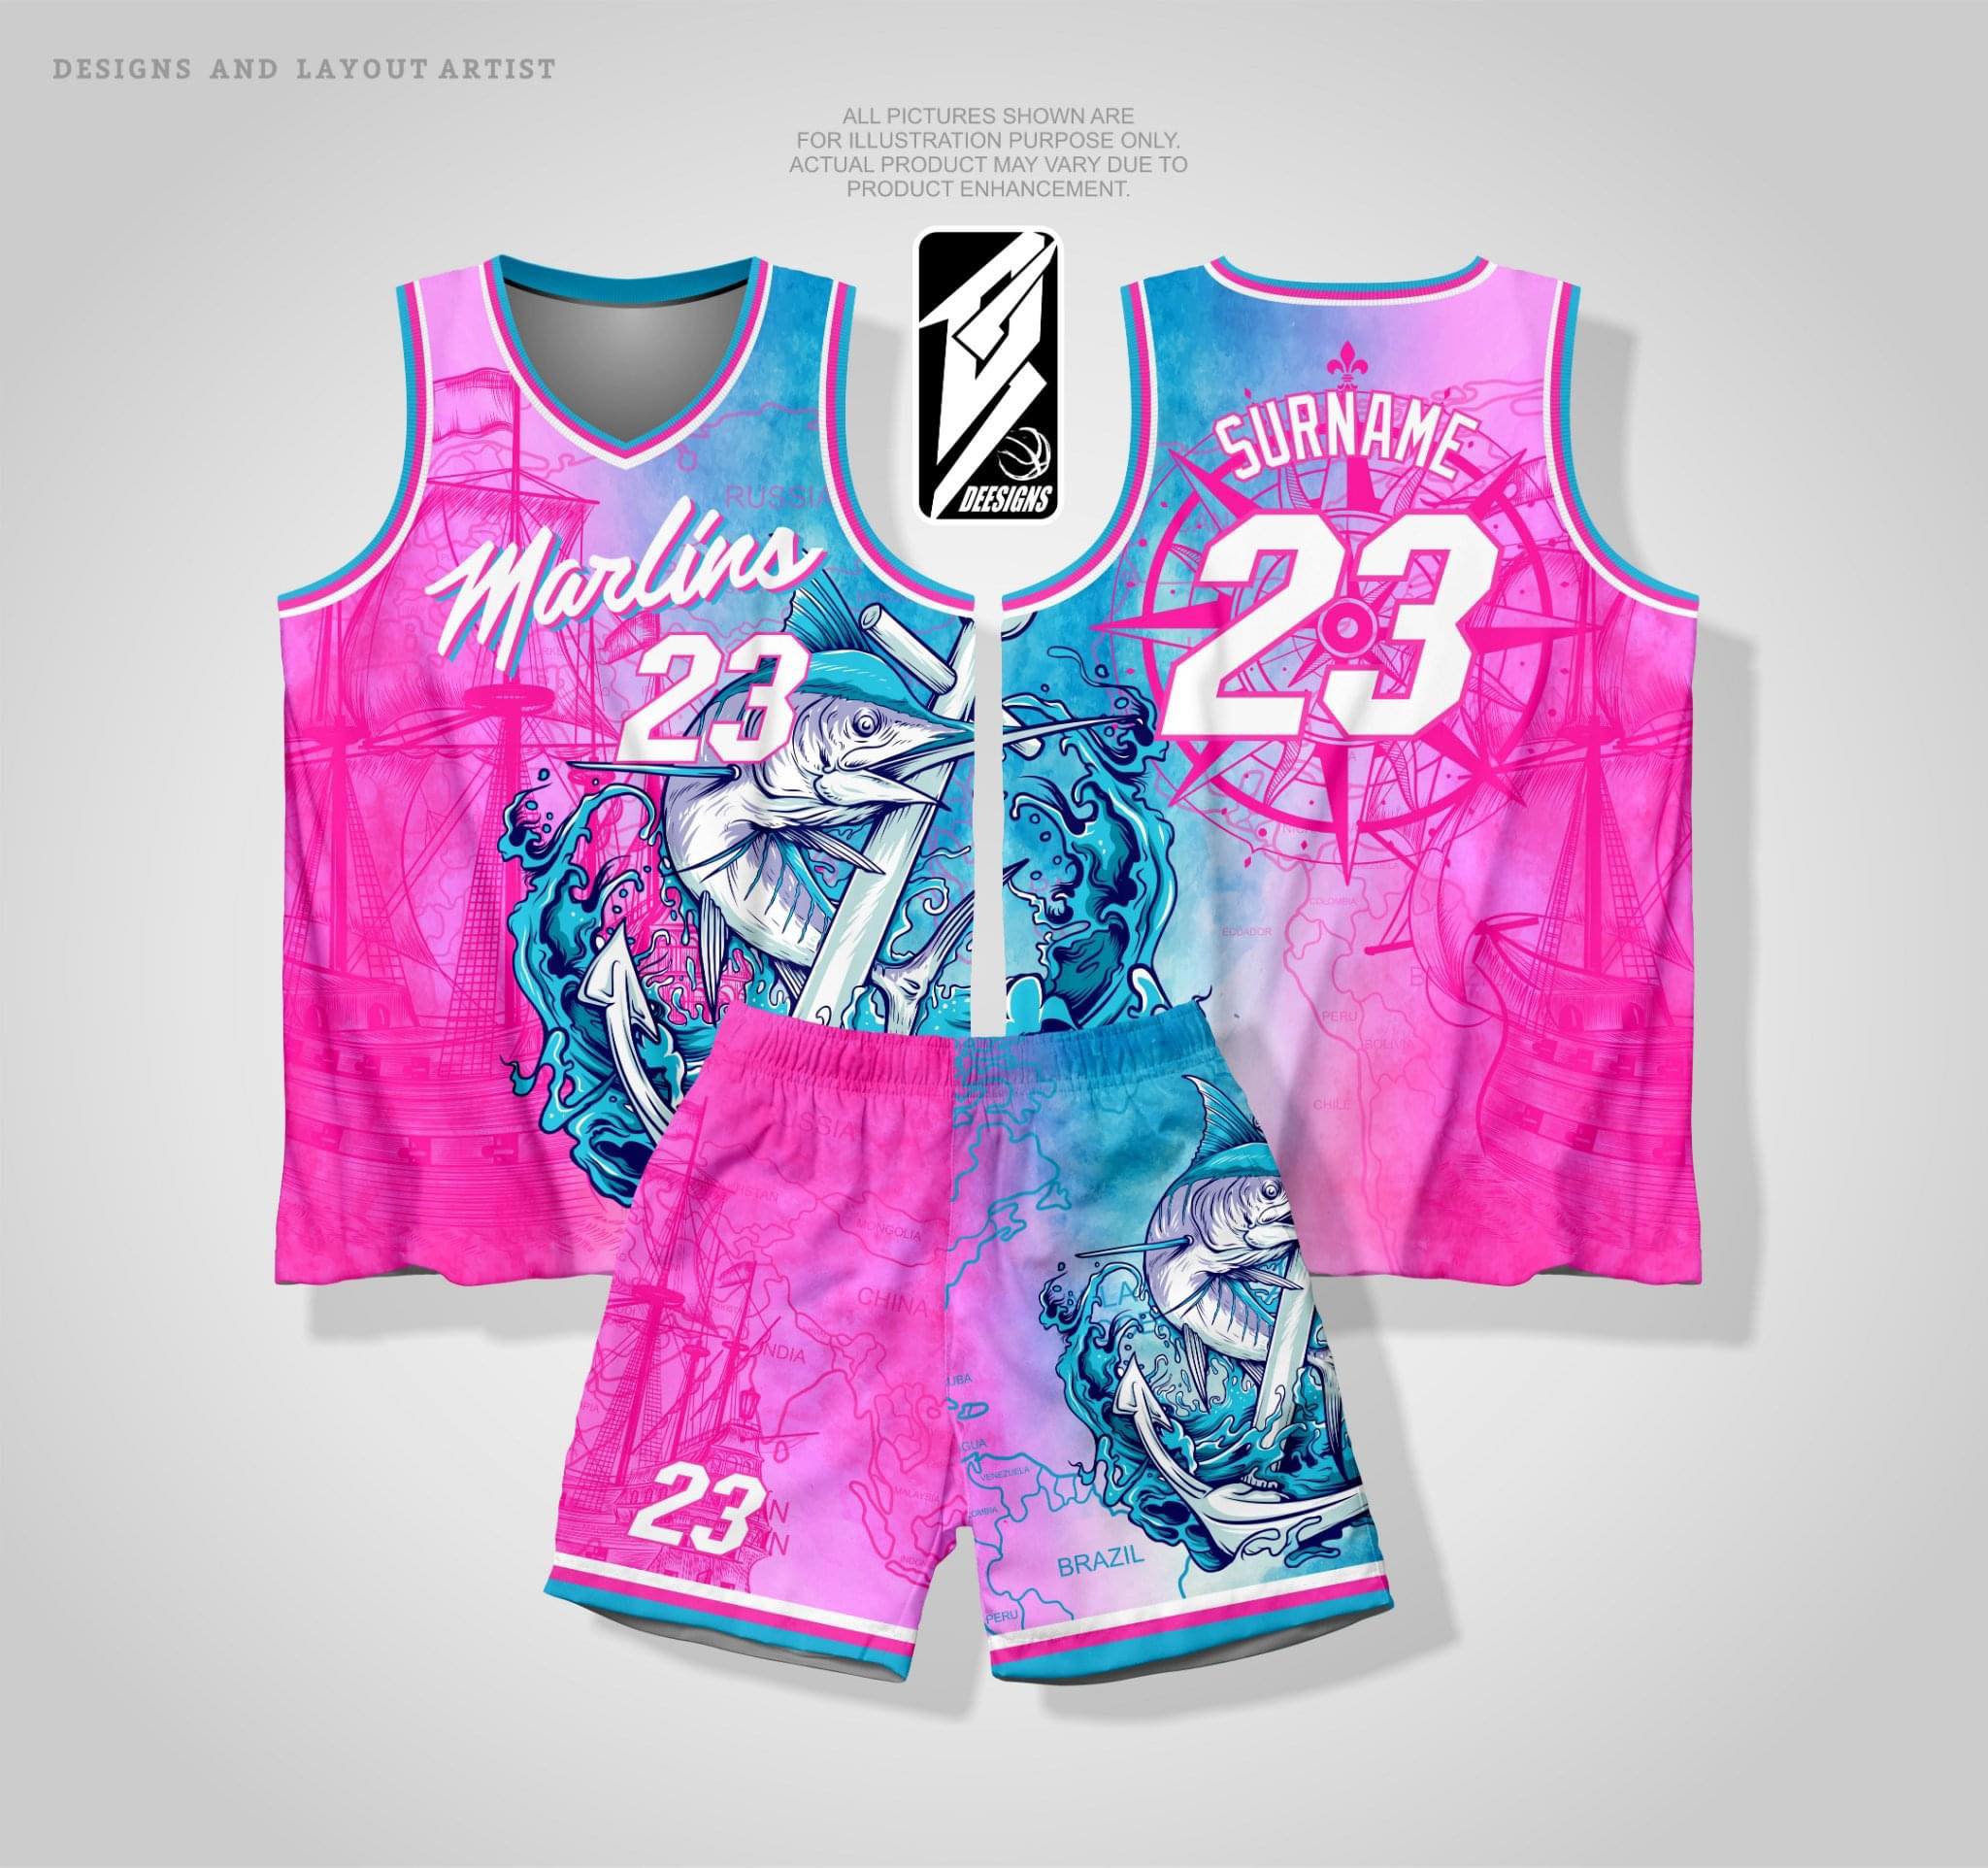 peach color jersey basketball